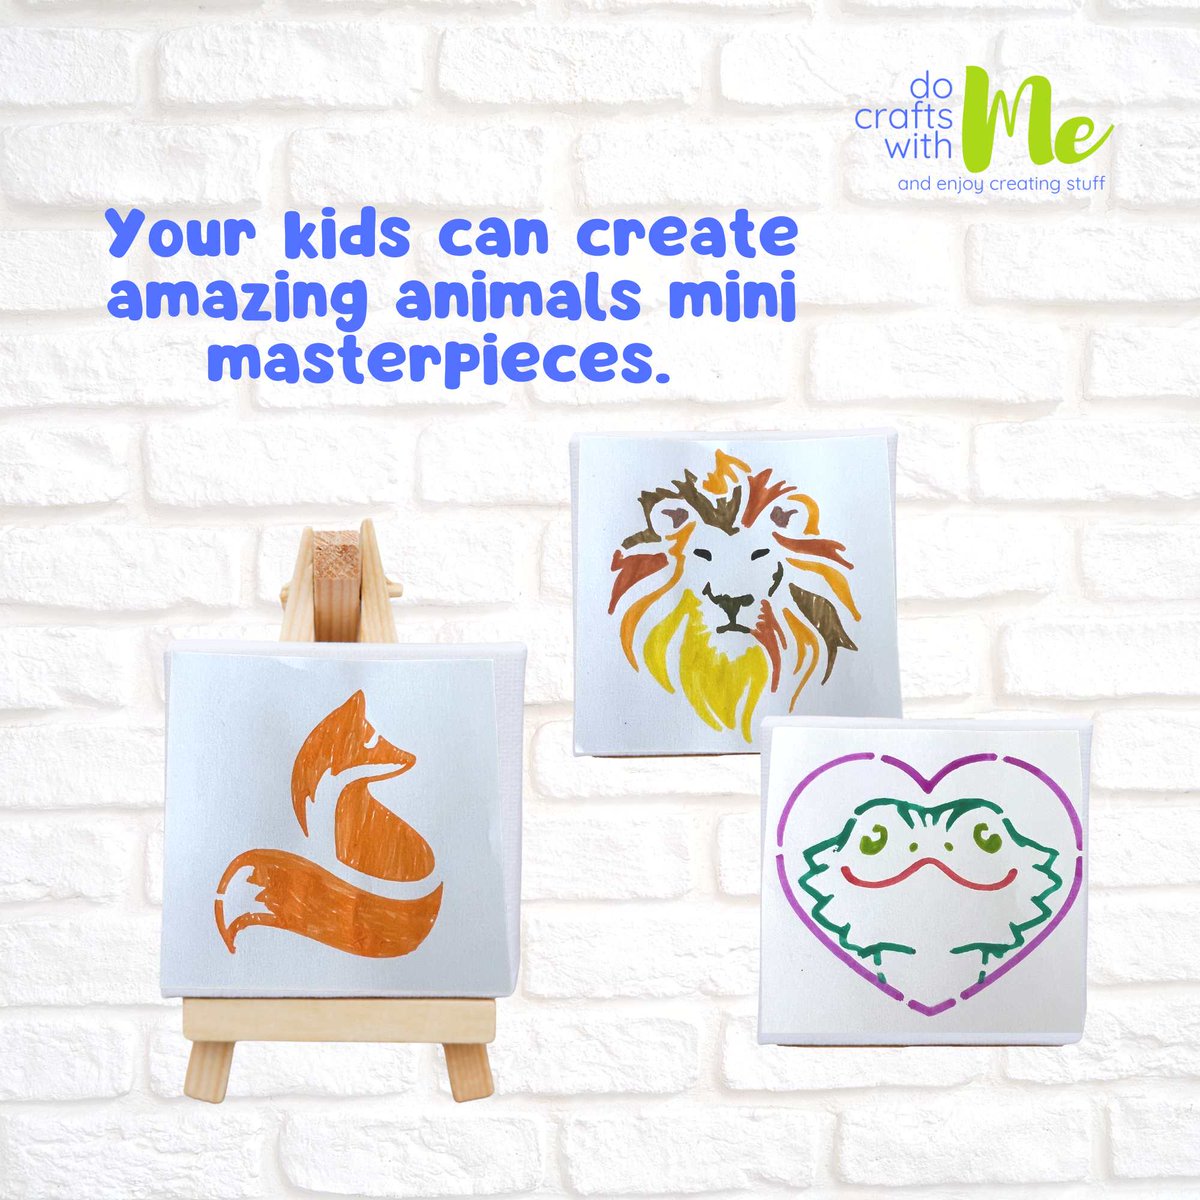 Let creativity soar with our adorable Mini Canvas Art Kit and Mini Easel! Unleash your child's inner artist and watch as they create beautiful masterpieces that make perfect gifts, like for Father's Day!
#DoCraftsWithMe #MiniCanvasArt #KidsArtKit #CreativeKids #MiniEasel